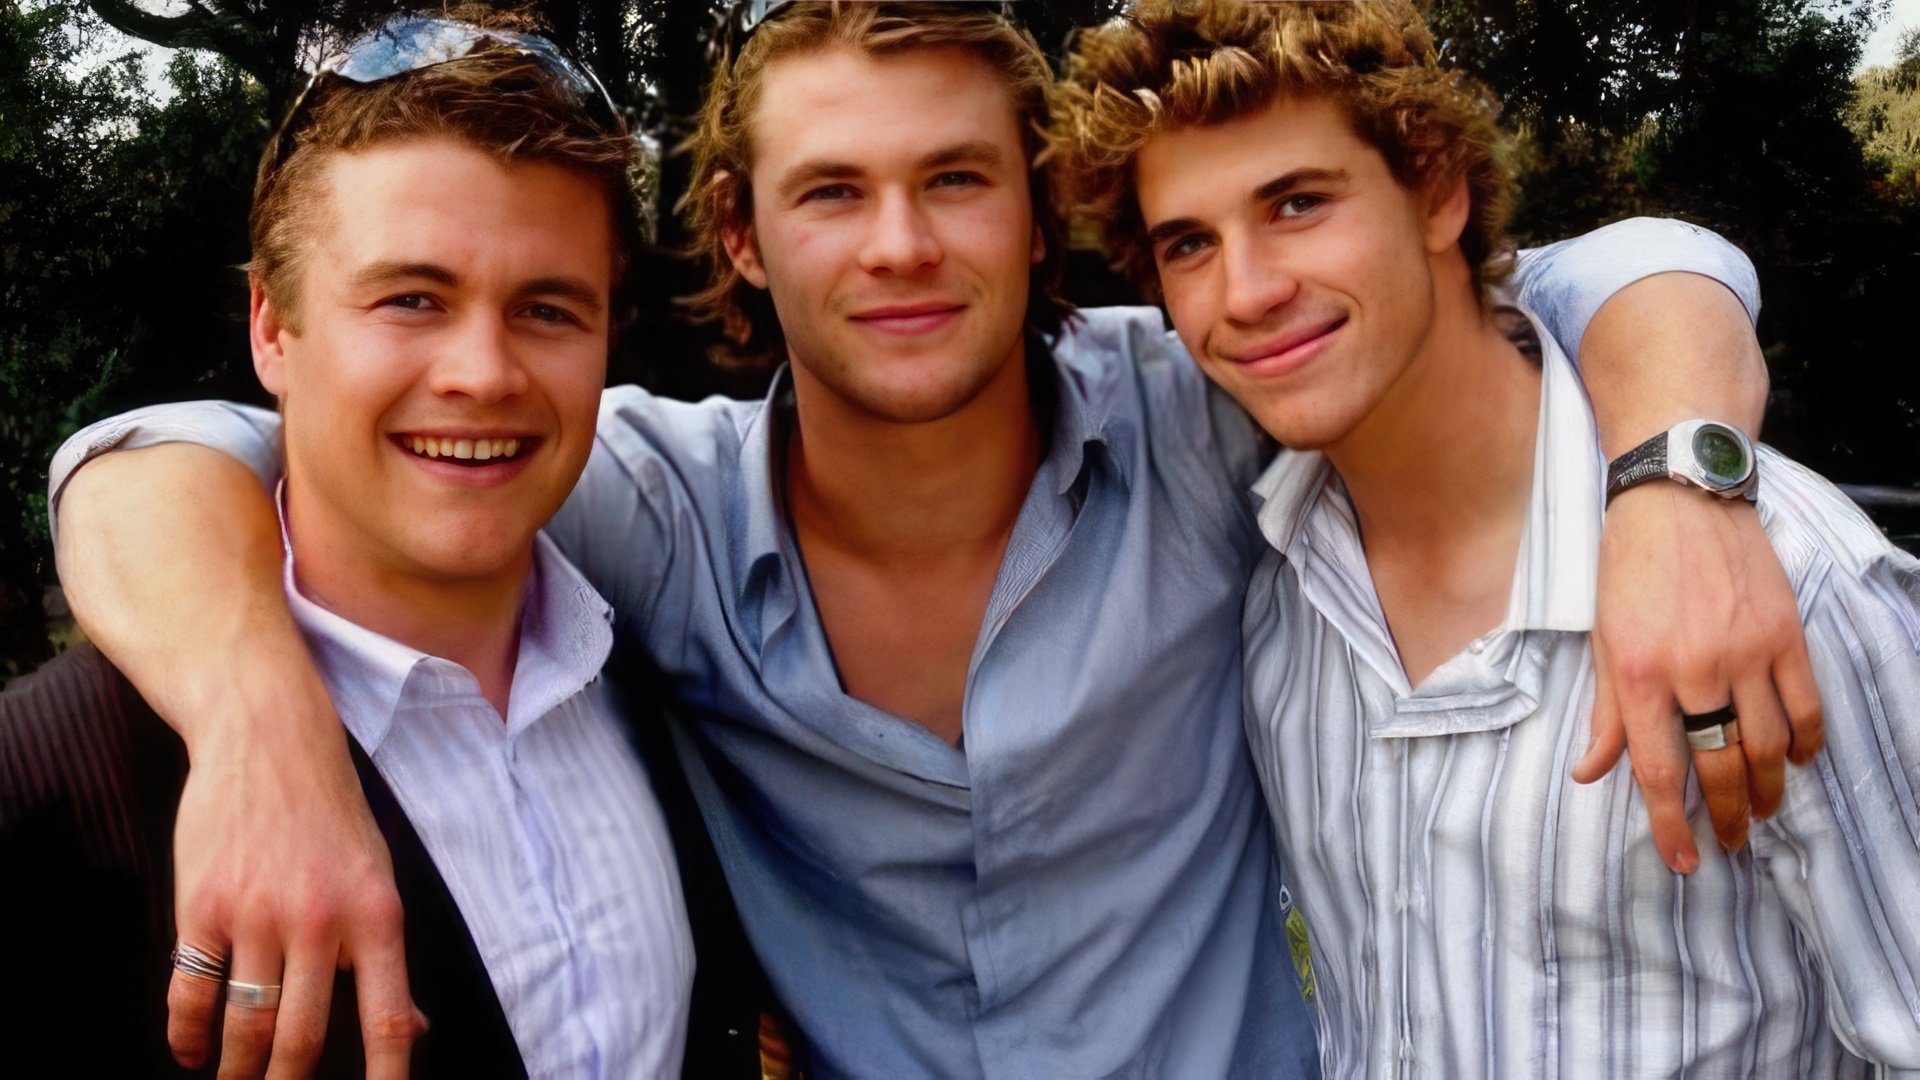 The Hemsworth Brothers: Luke, Chris, and Liam (from left to right)